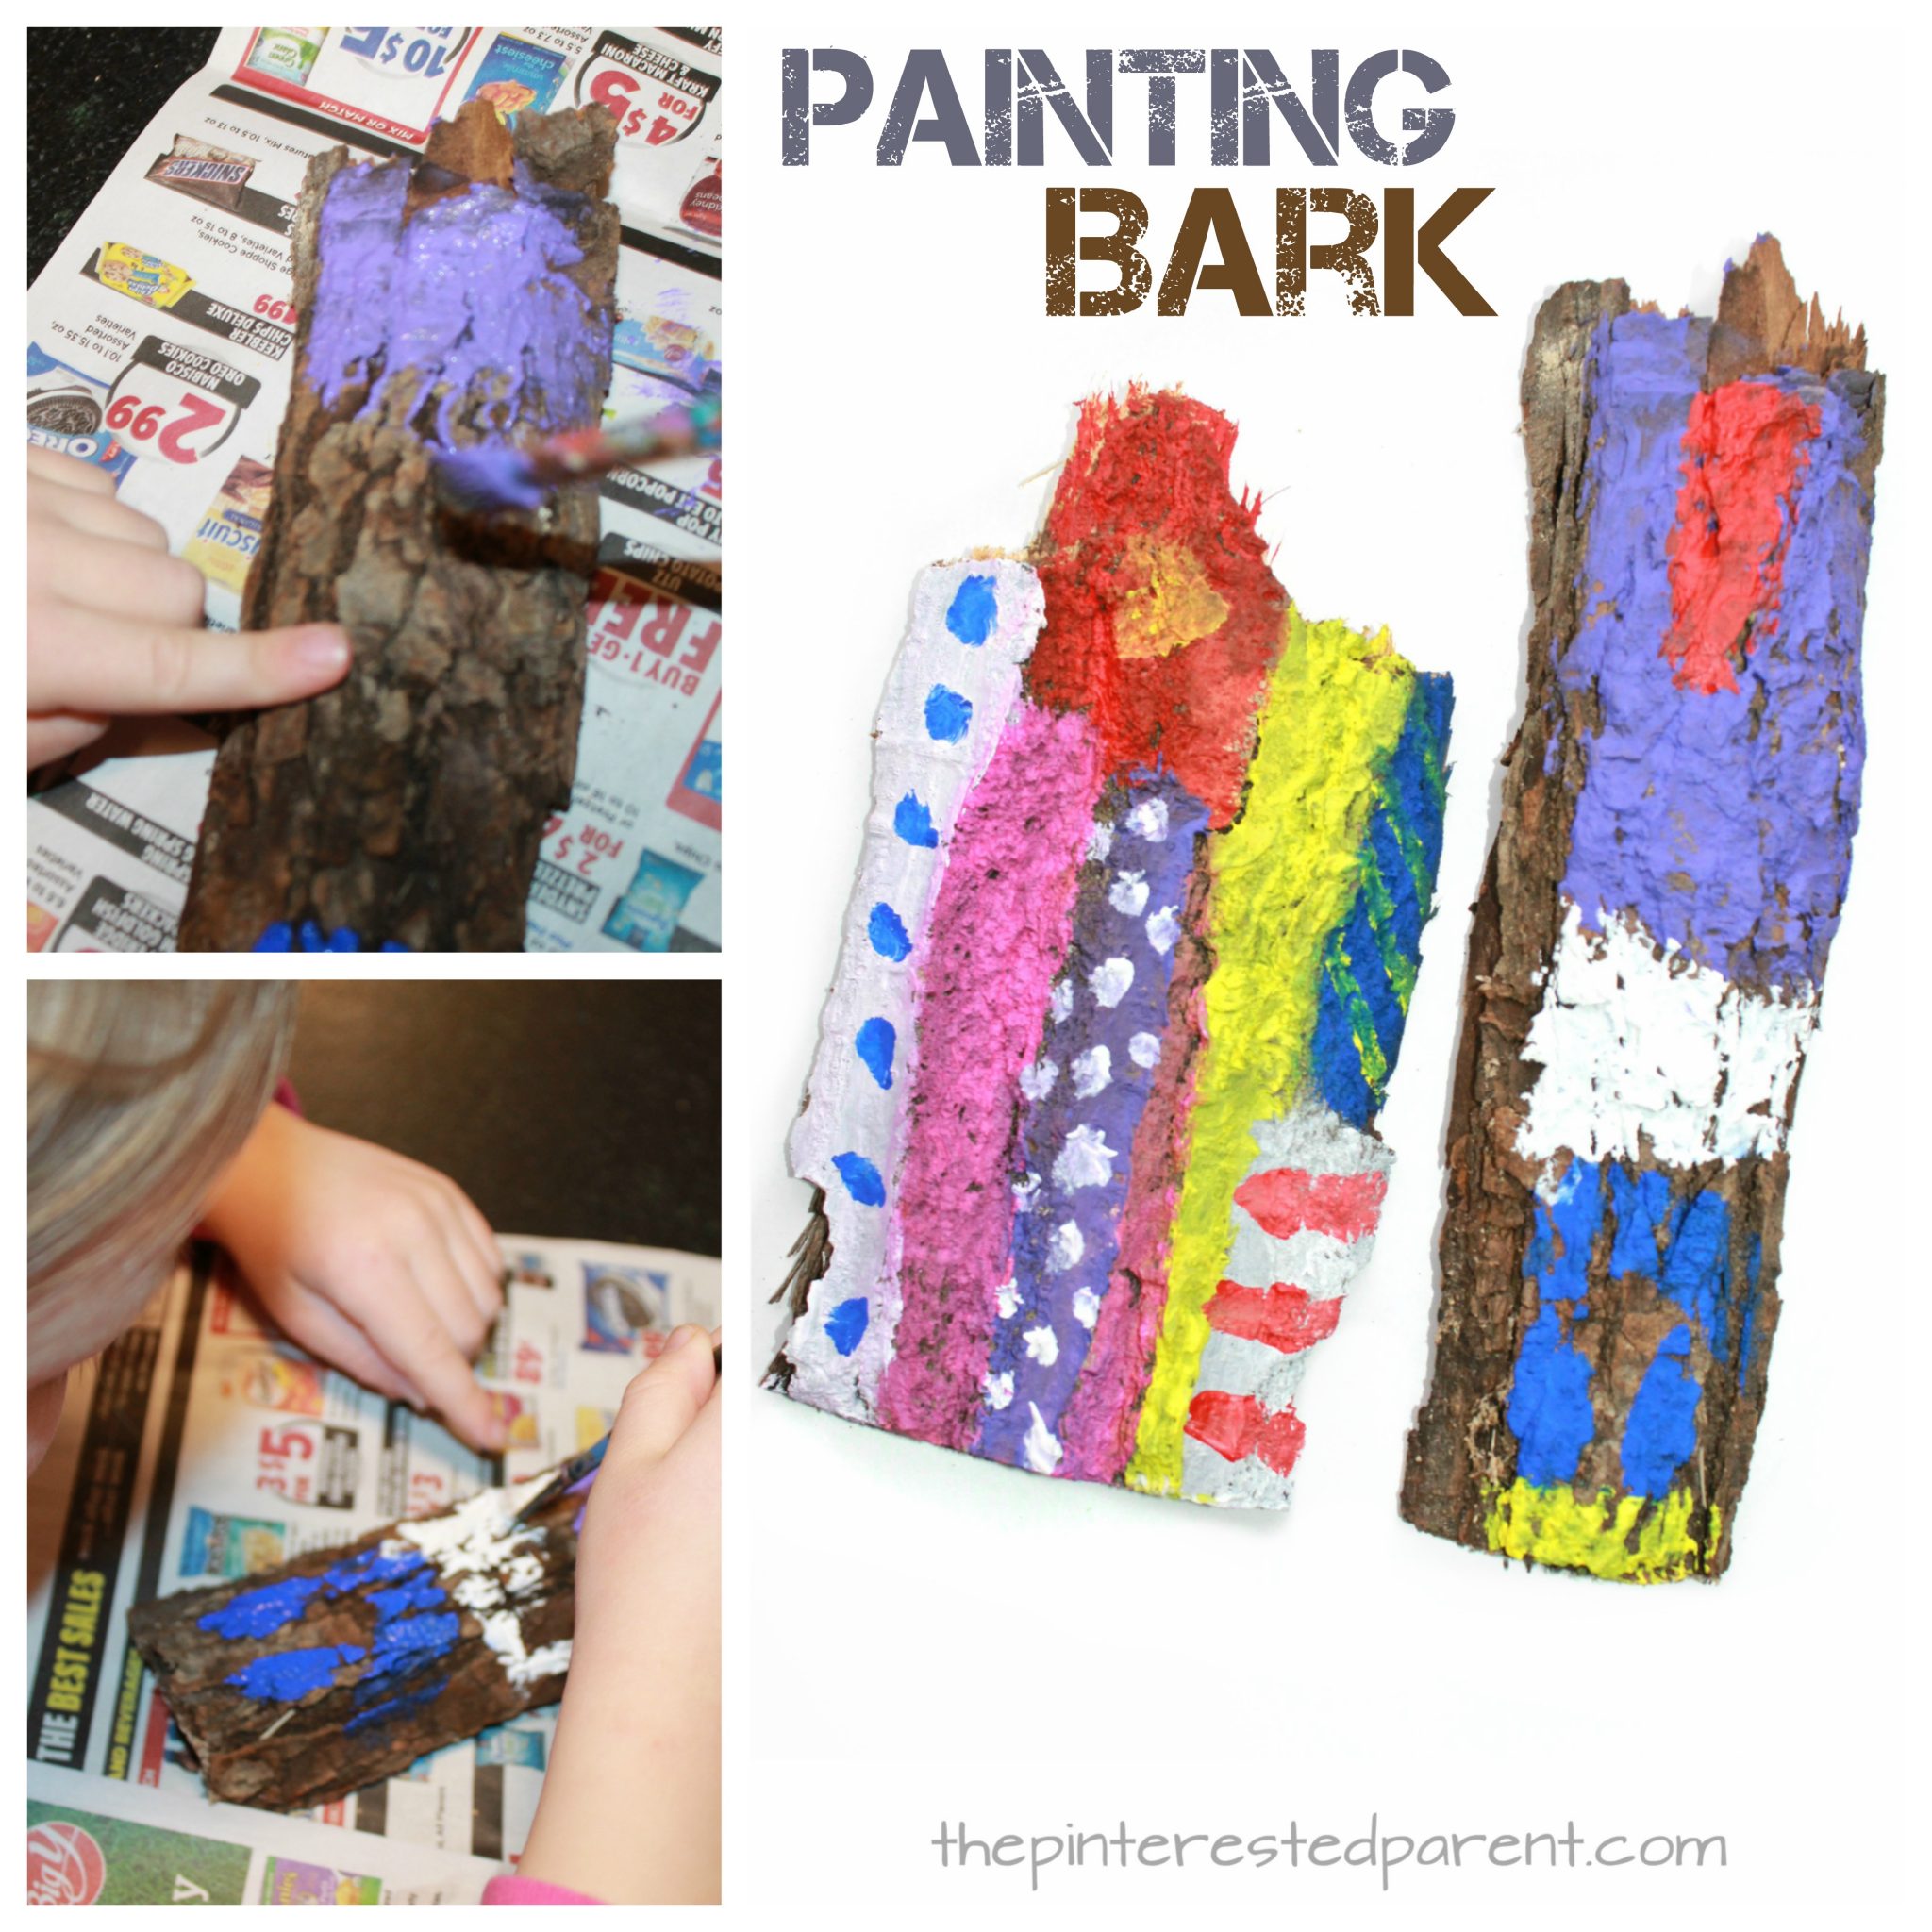 Painting on bark process art. Painting on nature and texture. Kid's arts